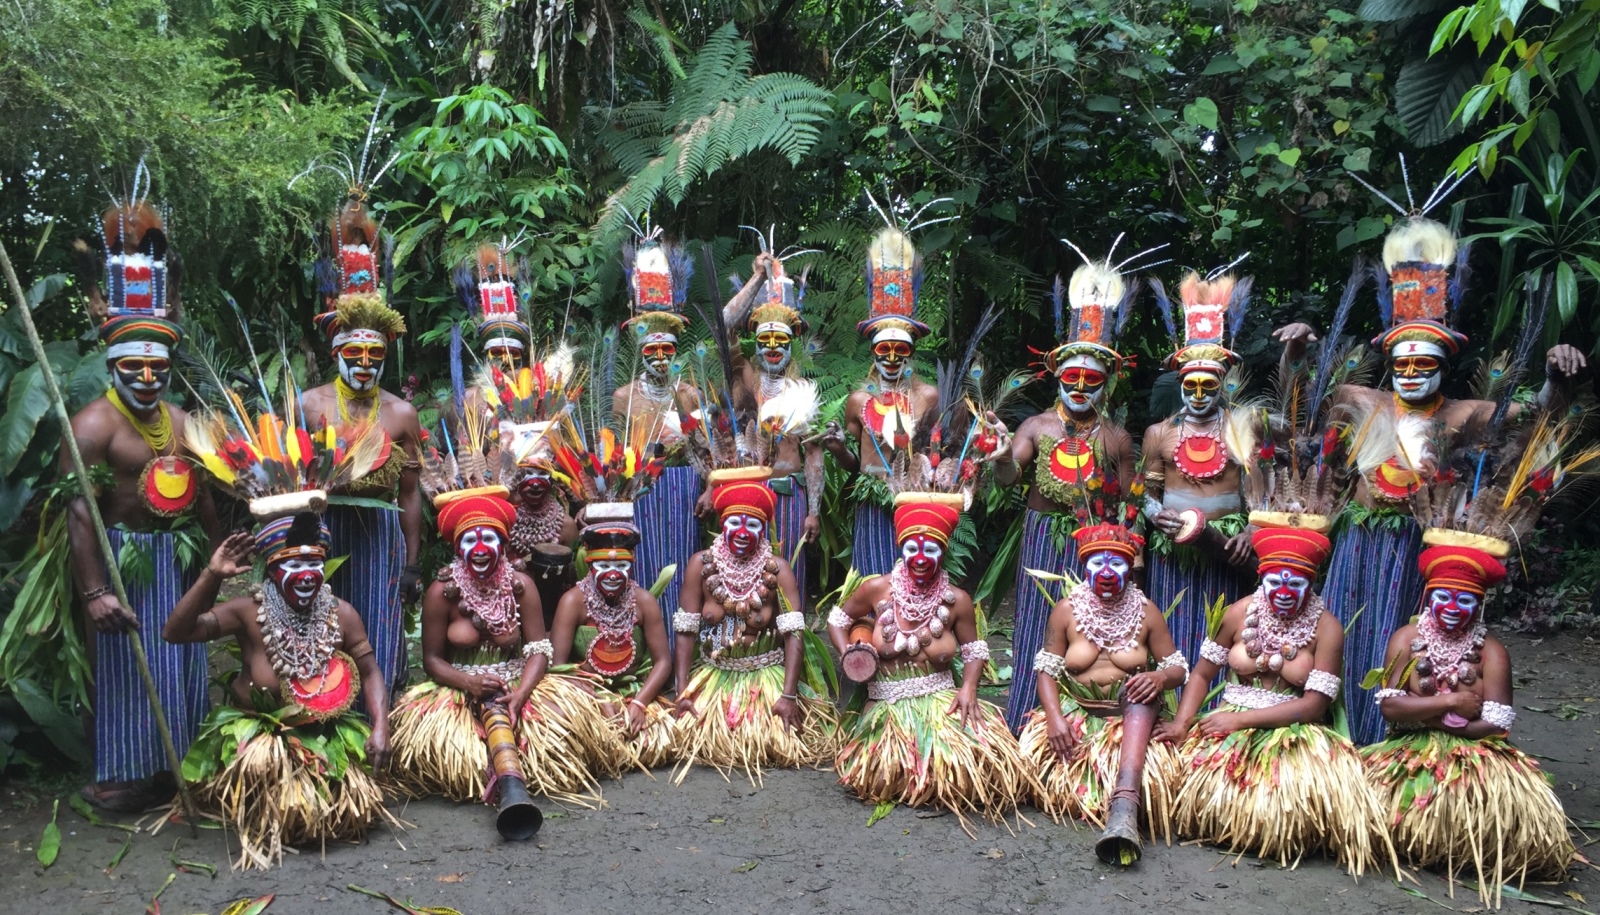 MyHeritage interviewers joined in a festive “sing-sing” in Papua, New Guinea. Photo by Golan Levi